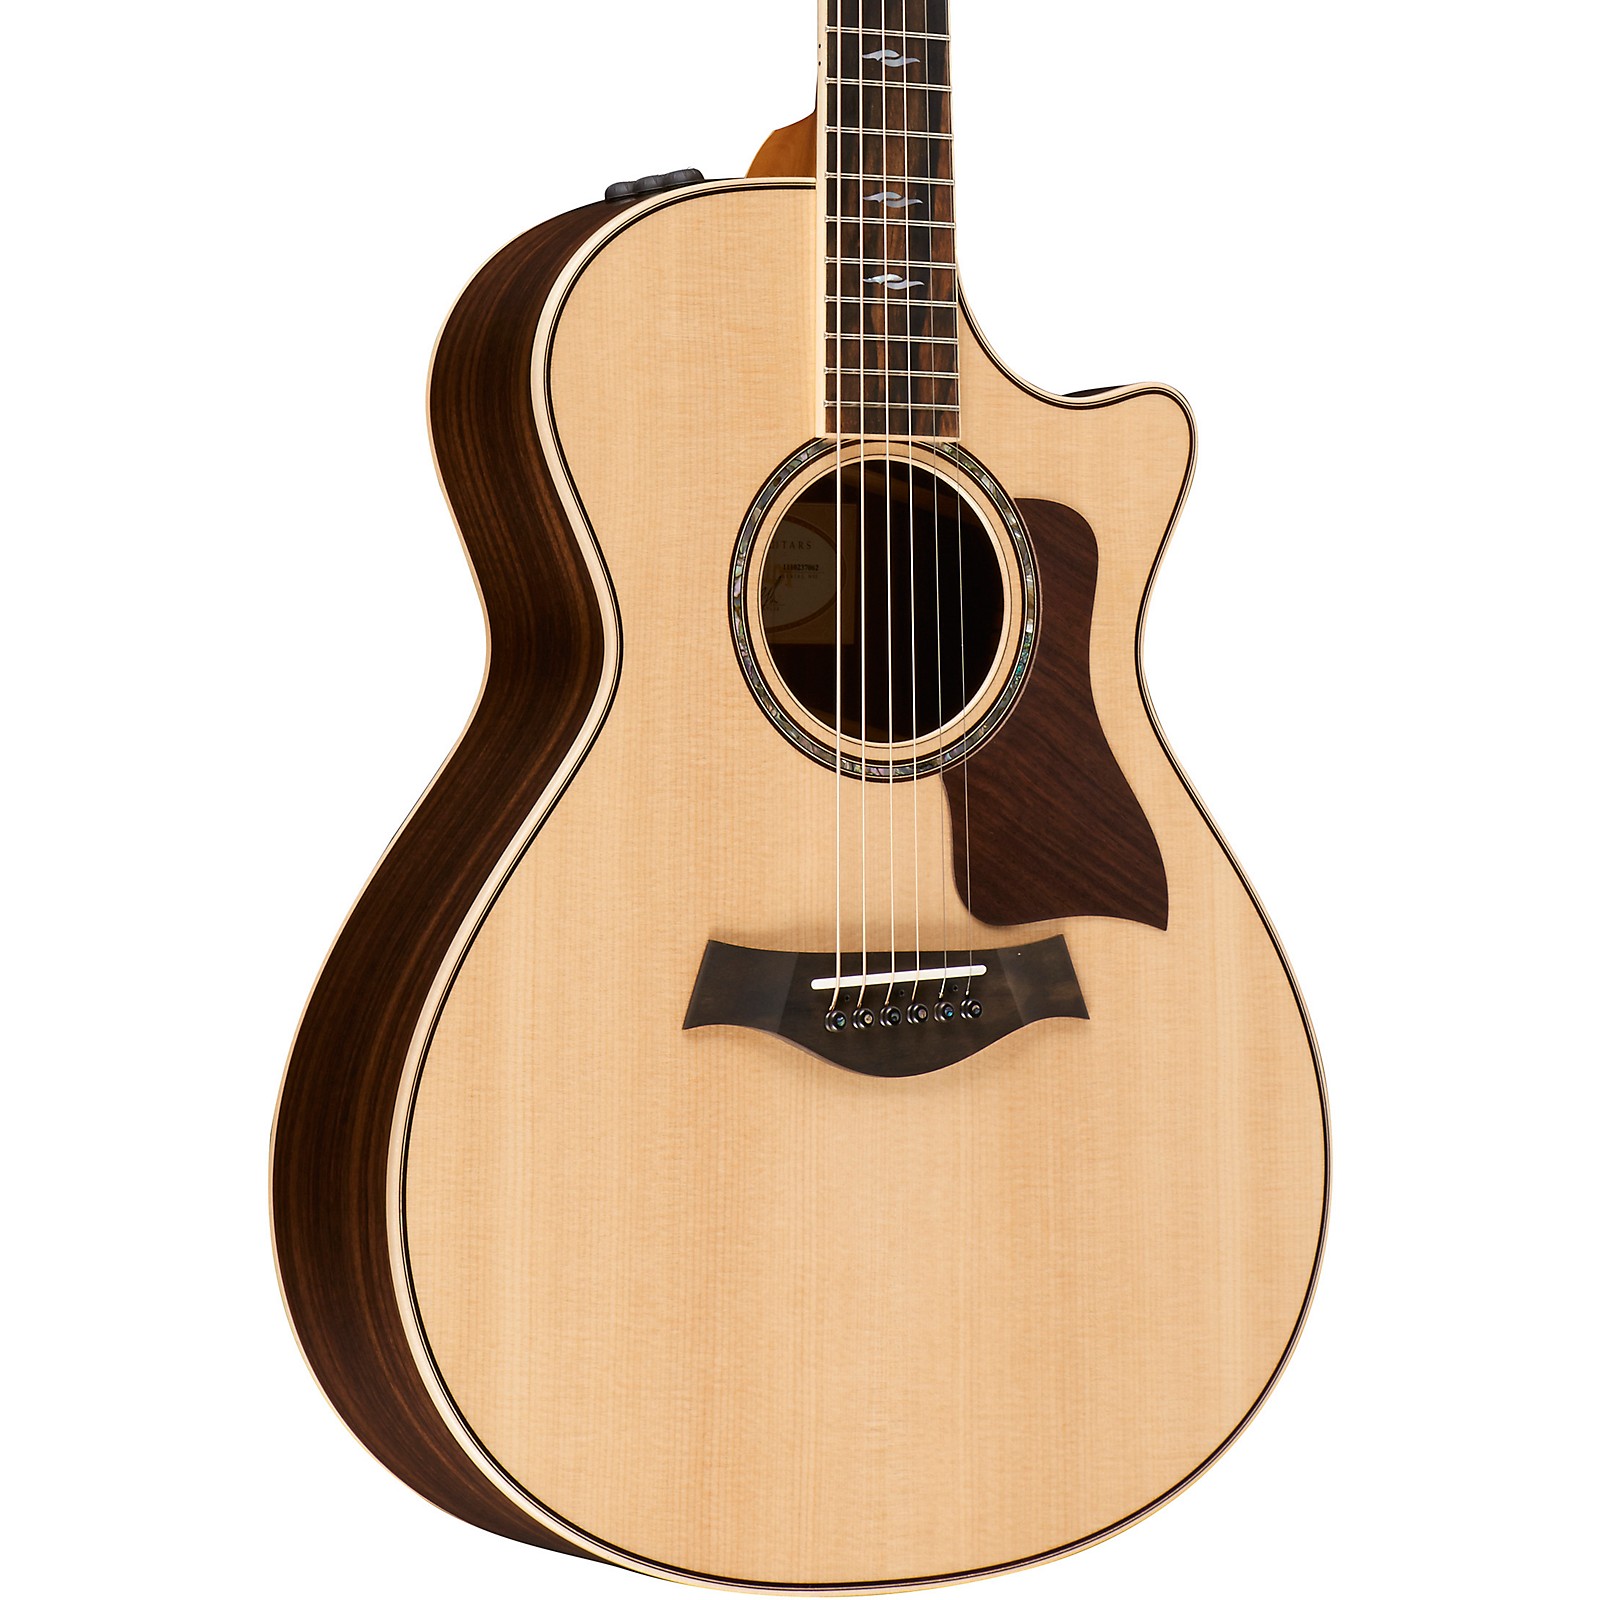 dating taylor usa guitar used for sale